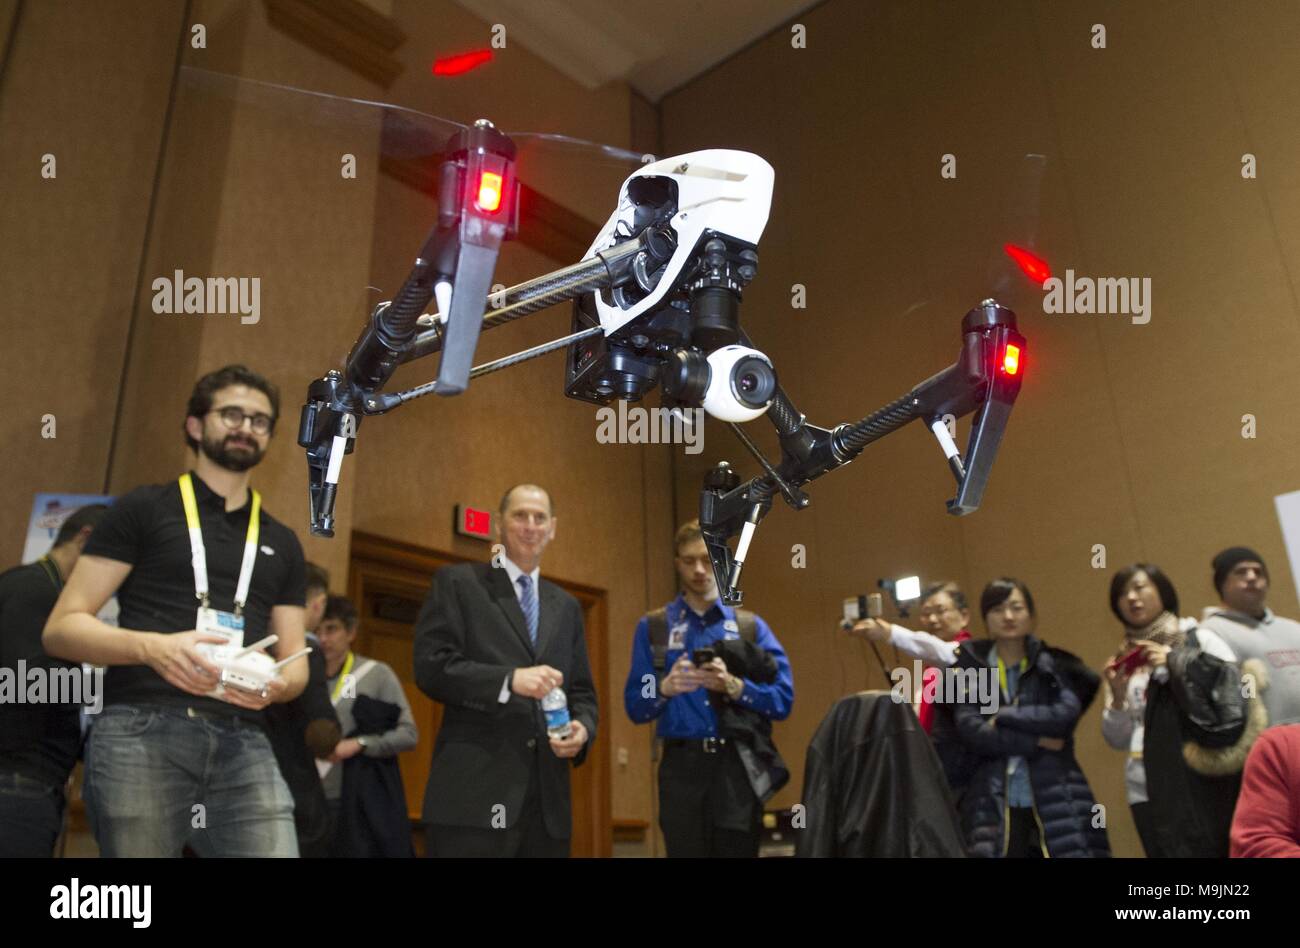 Beijing, USA. 4th Jan, 2015. Representatives from Chinese DJI company show Inspire 1 quadcopter during the preview media show of The Consumer Electronics Show (CES) in Las Vegas, the United States, Jan. 4, 2015. A 'huge' trade deficit with China is reportedly behind the U.S. administration's plan to slap tariffs on up to 60 billion U.S. dollars of Chinese imports and restrict Chinese investment. But data sometimes lies, and could shield the bigger picture. Credit: Yang Lei/Xinhua/Alamy Live News Stock Photo